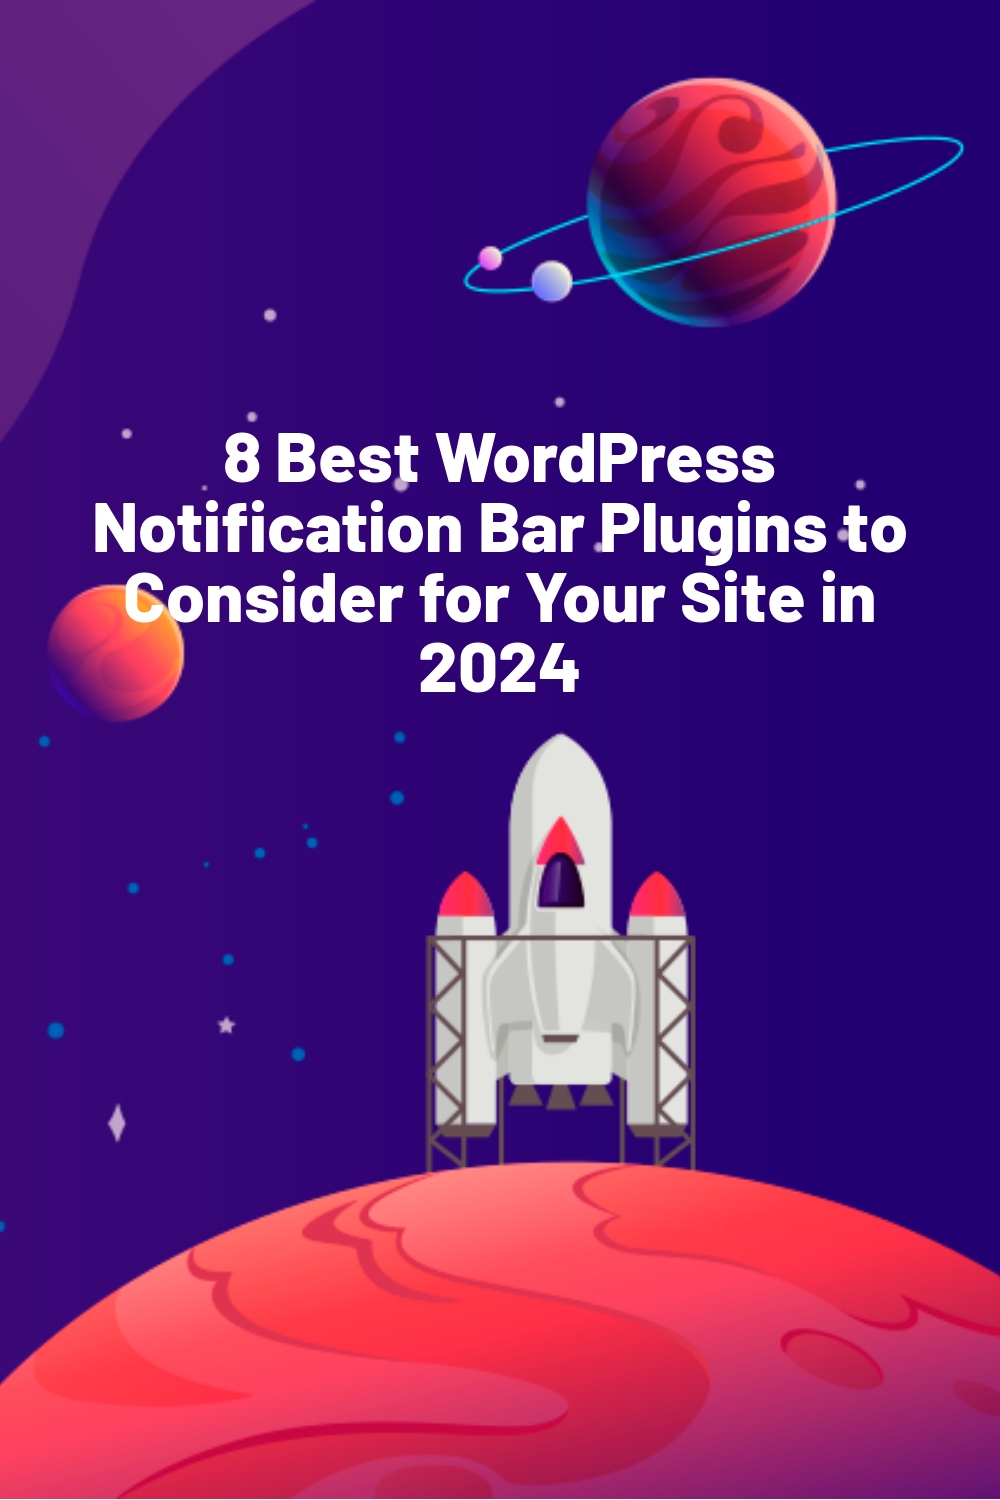 8 Best WordPress Notification Bar Plugins to Consider for Your Site in 2024